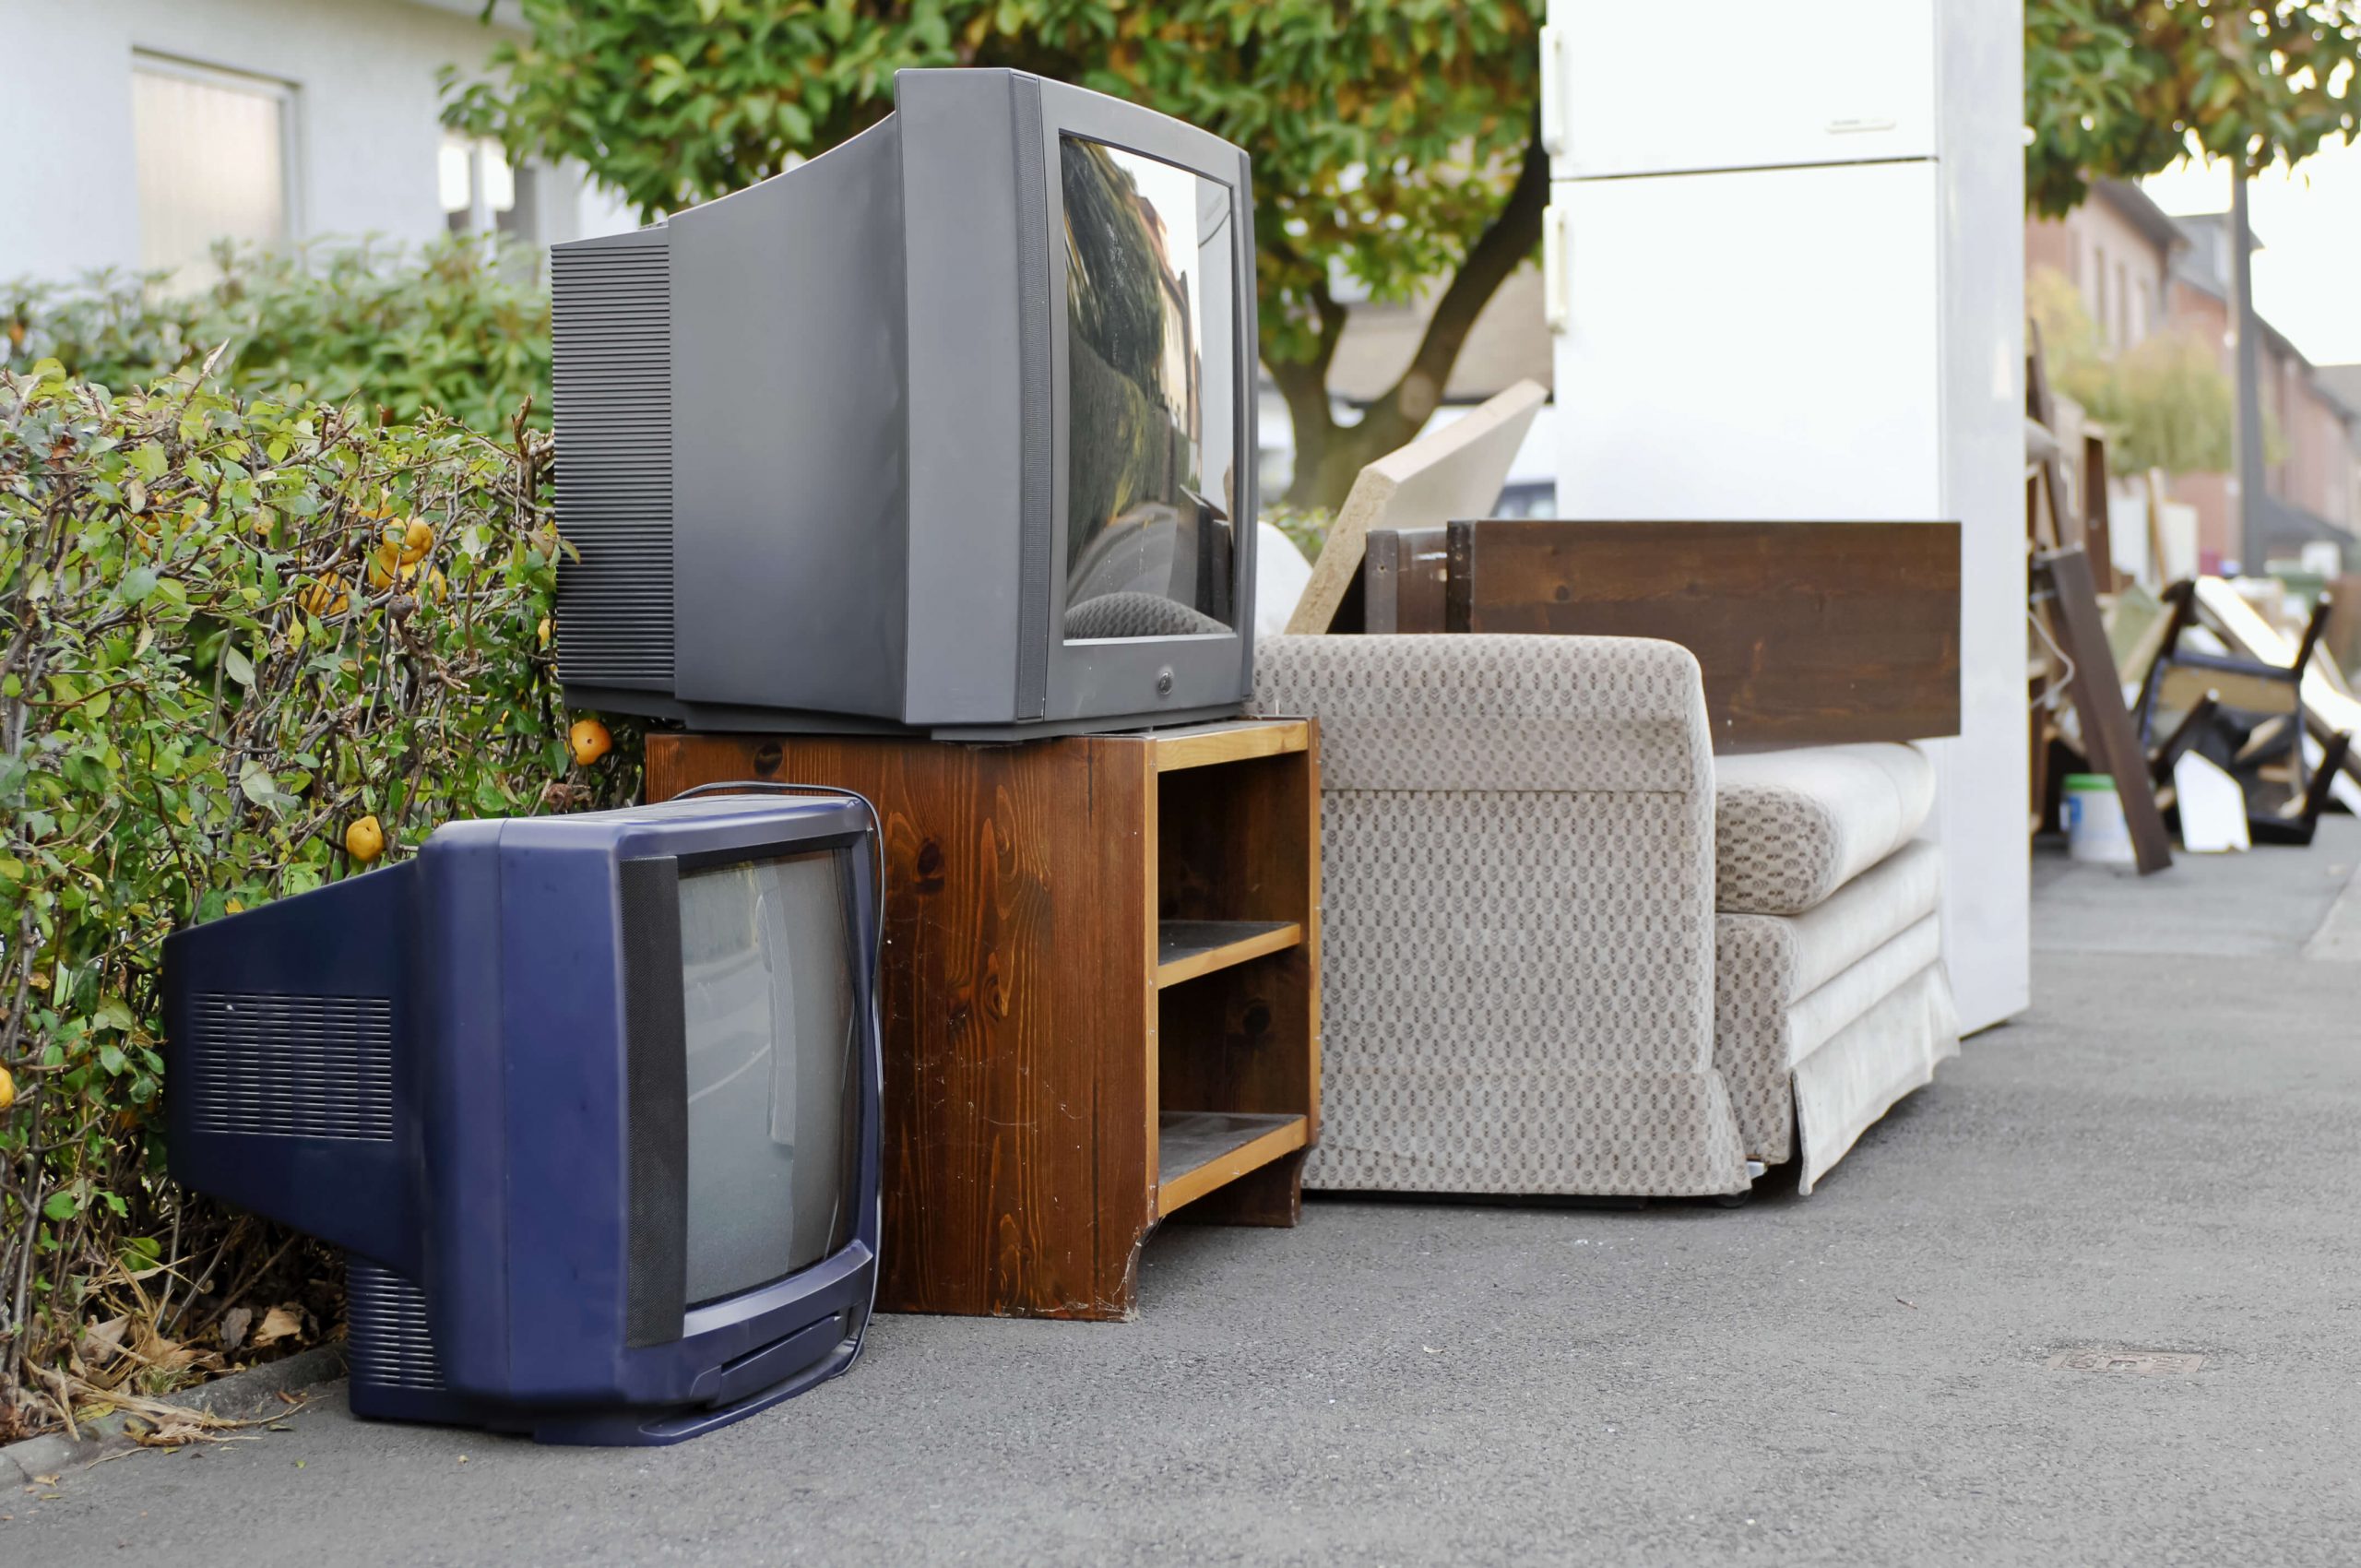 TVs, TV stand, and sofa out on curb